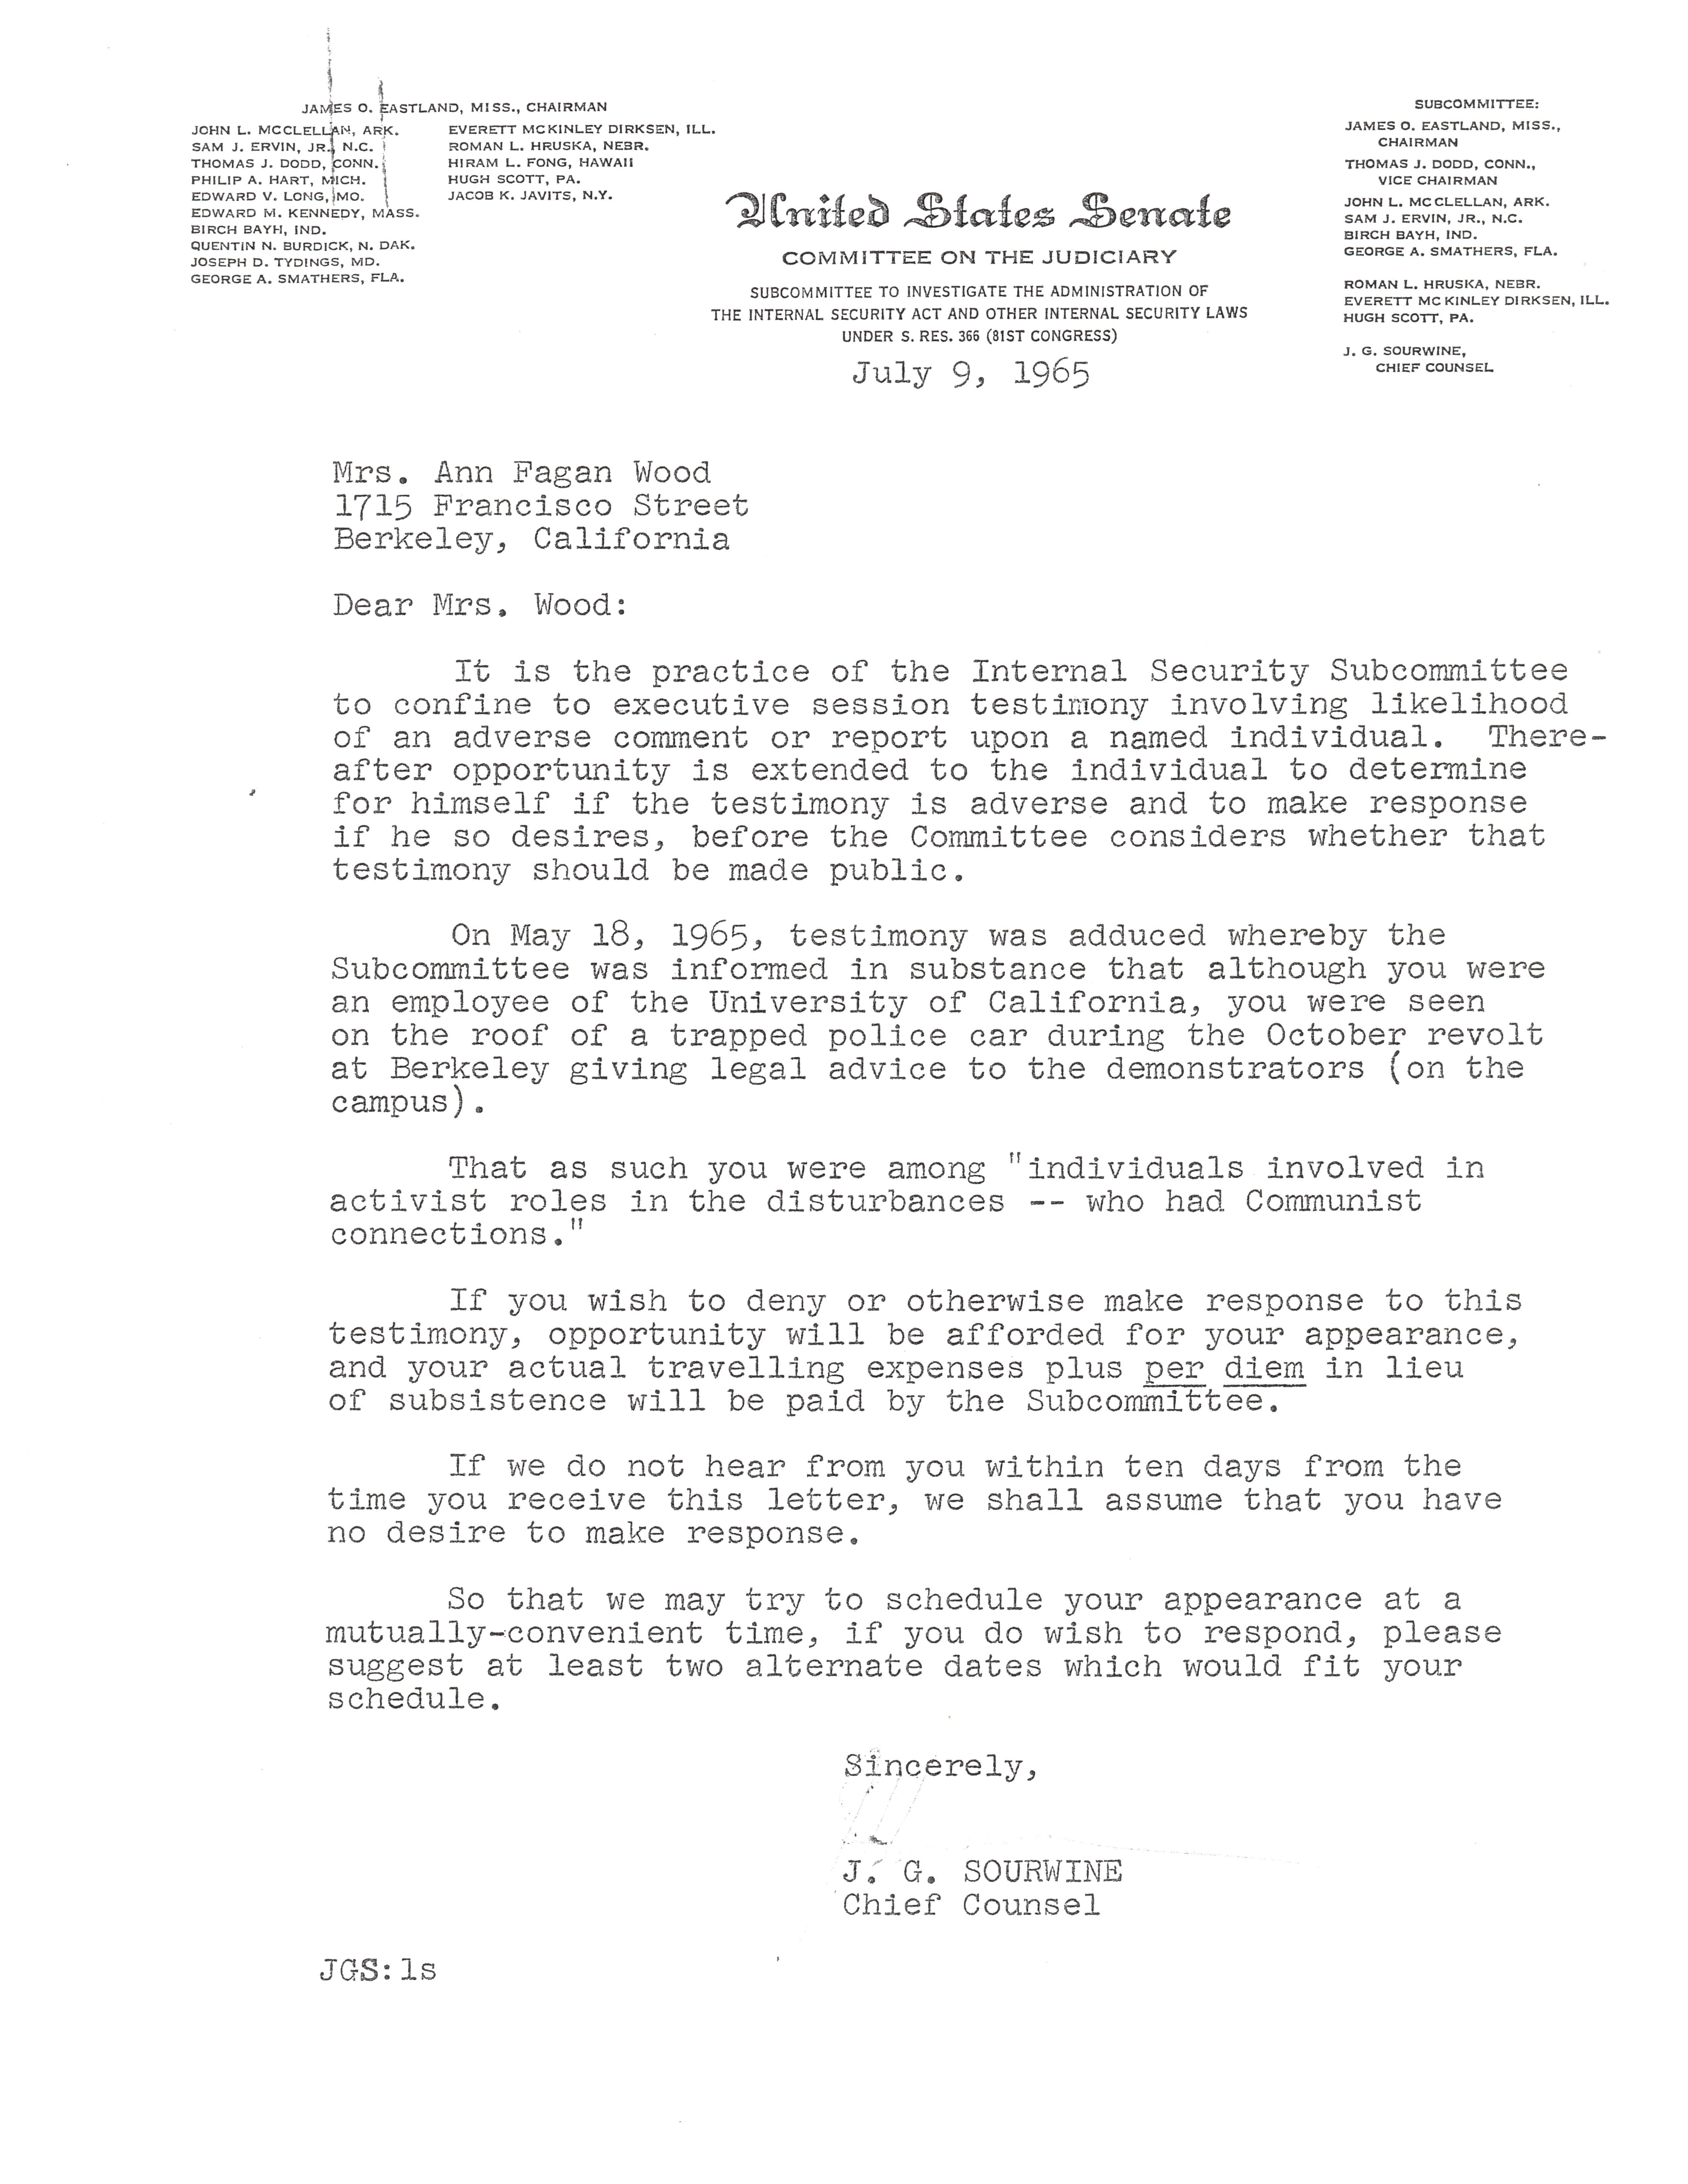 July 9, 1965 letter from J.G. Sourwine, Chief Council, Committee on the Judiciary, US Senate to Mrs. Ann Fagan Wood